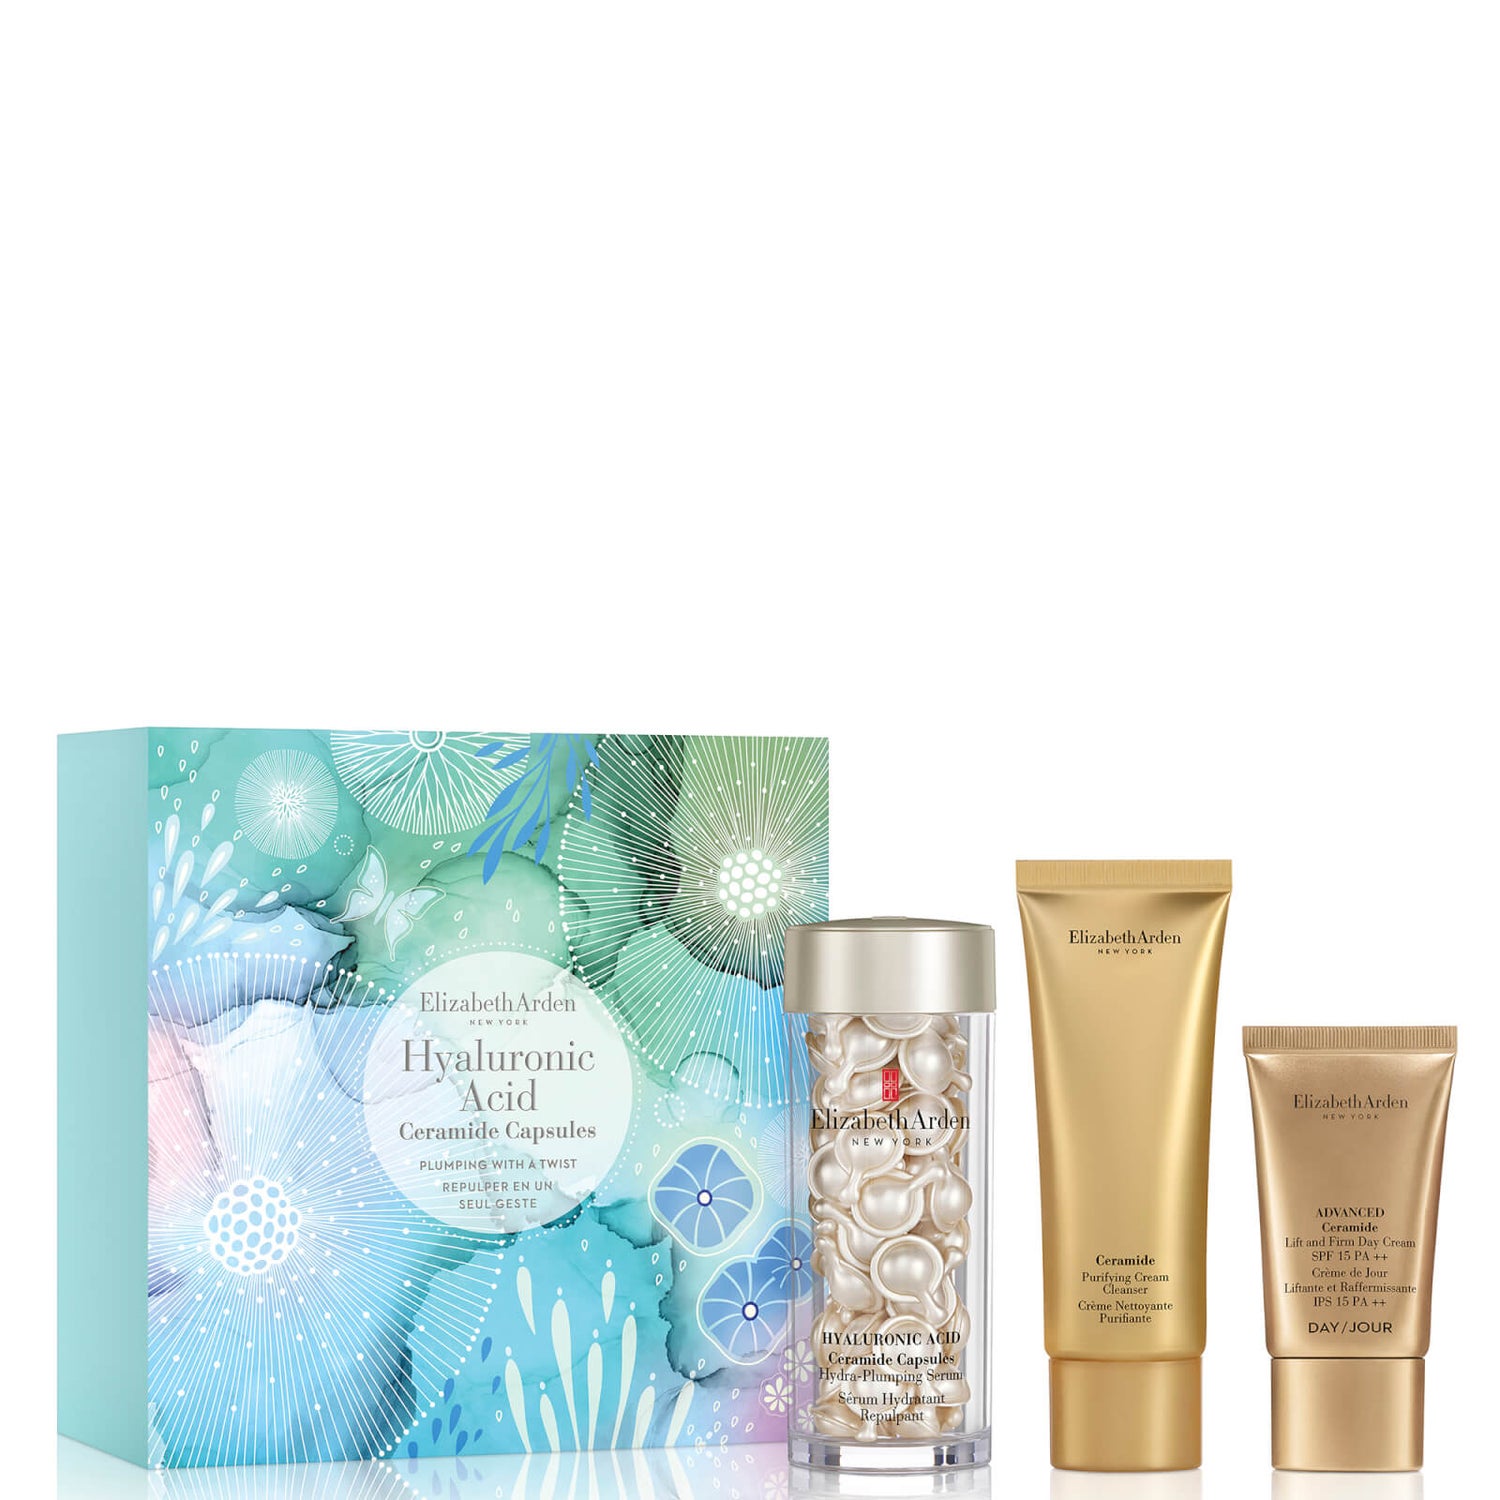 Elizabeth Arden Plumping with a Twist Hyaluronic Acid Ceramide Capsules (60 Capsules) Gift Set